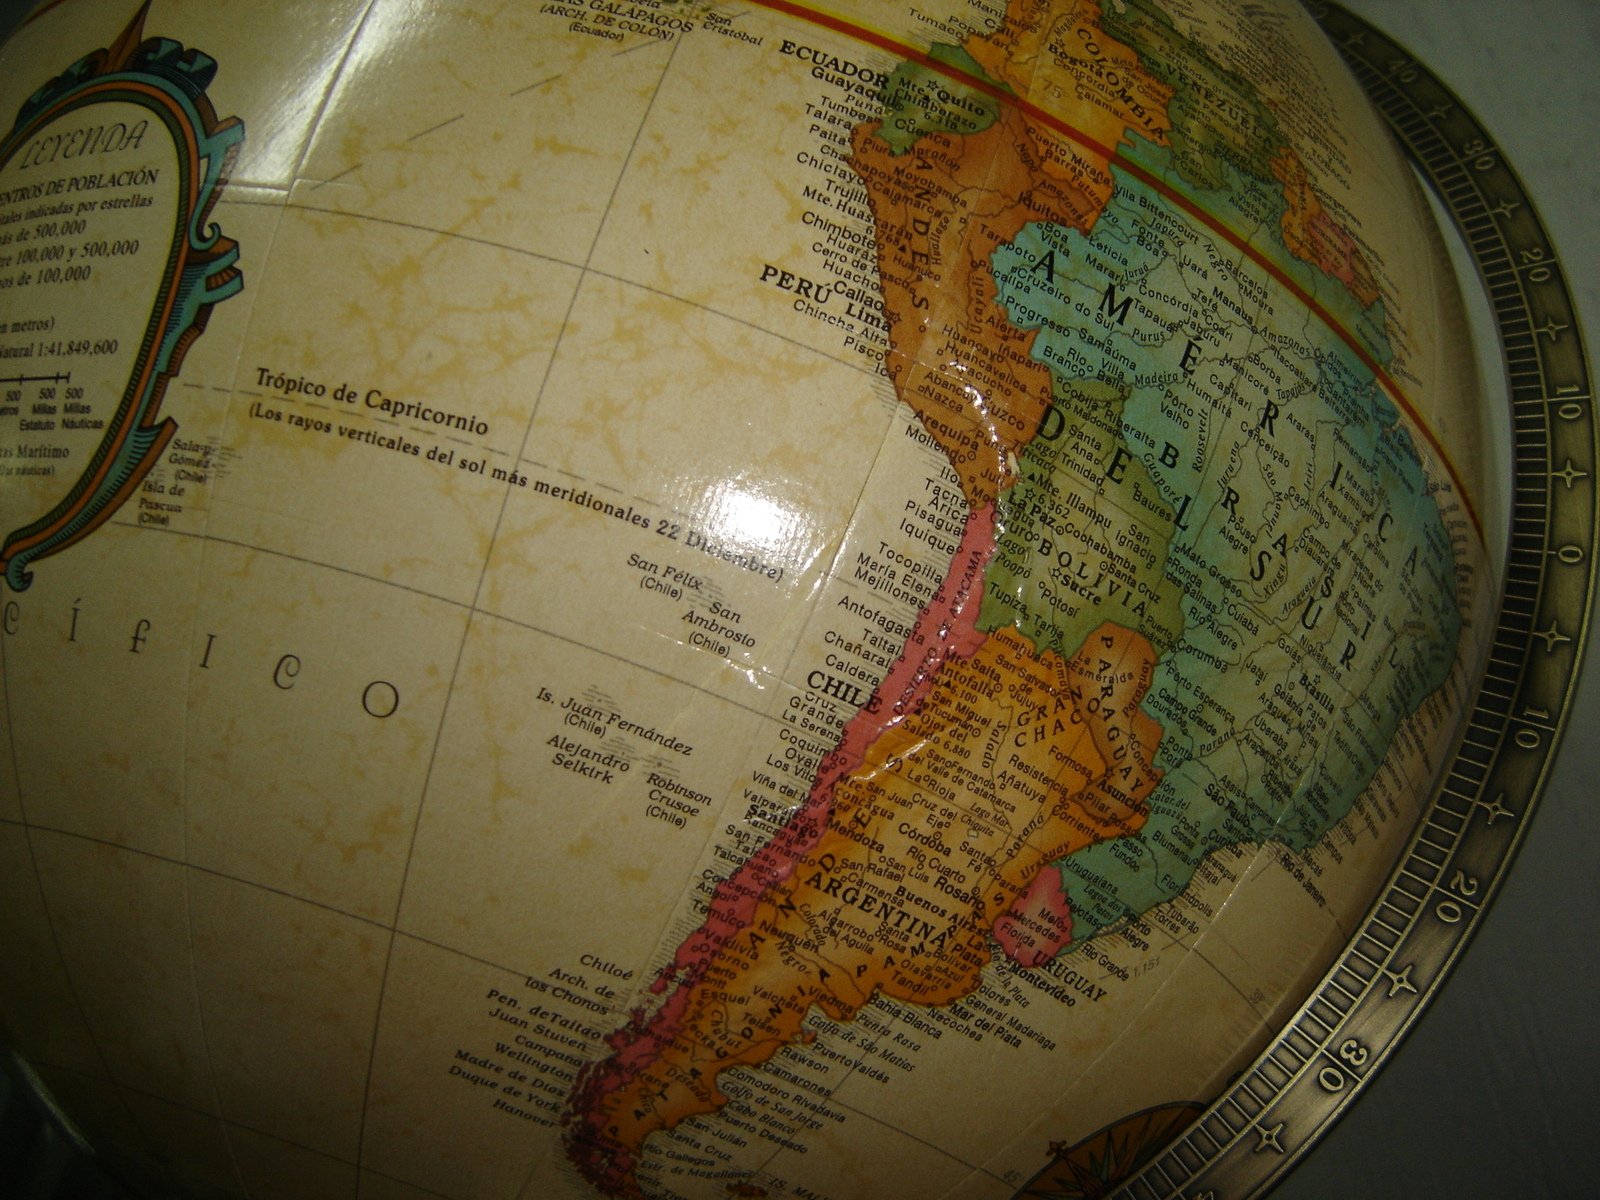 an antique style globe with colored maps on it